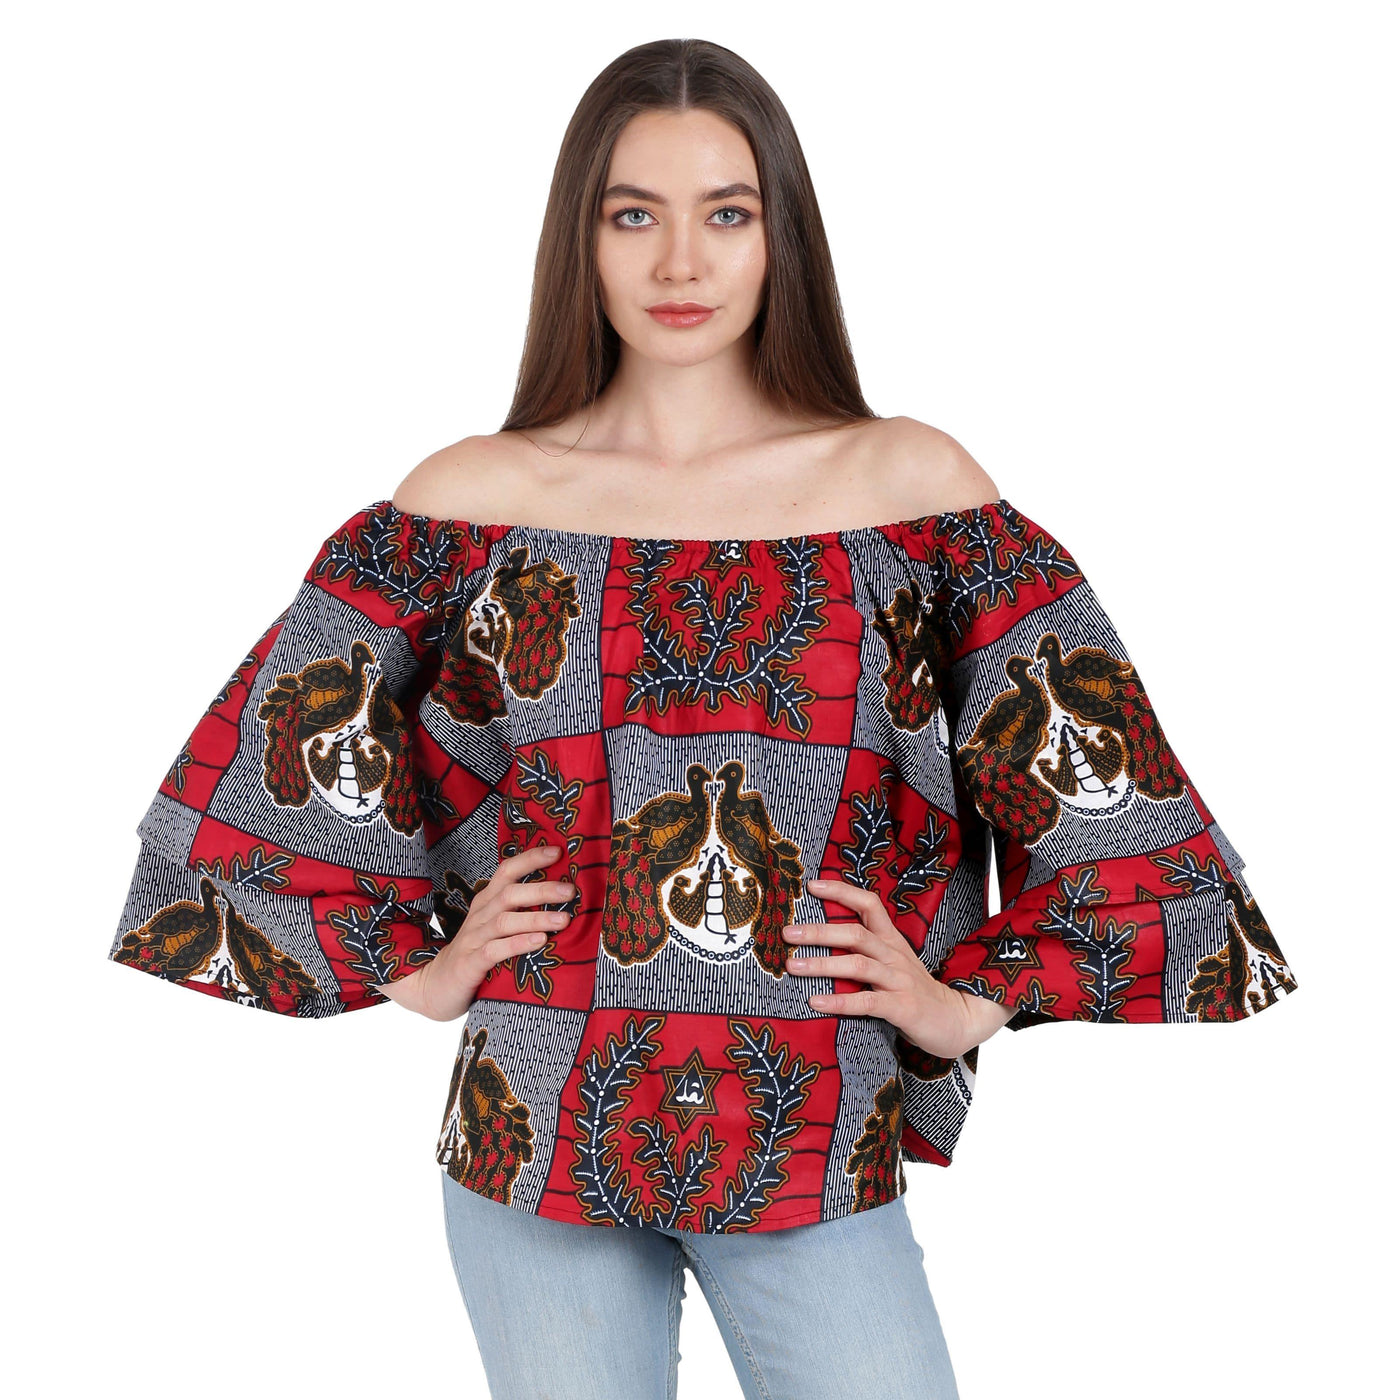 Structured African Print On/Off Shoulder Blouse 166-91 - Advance Apparels Inc